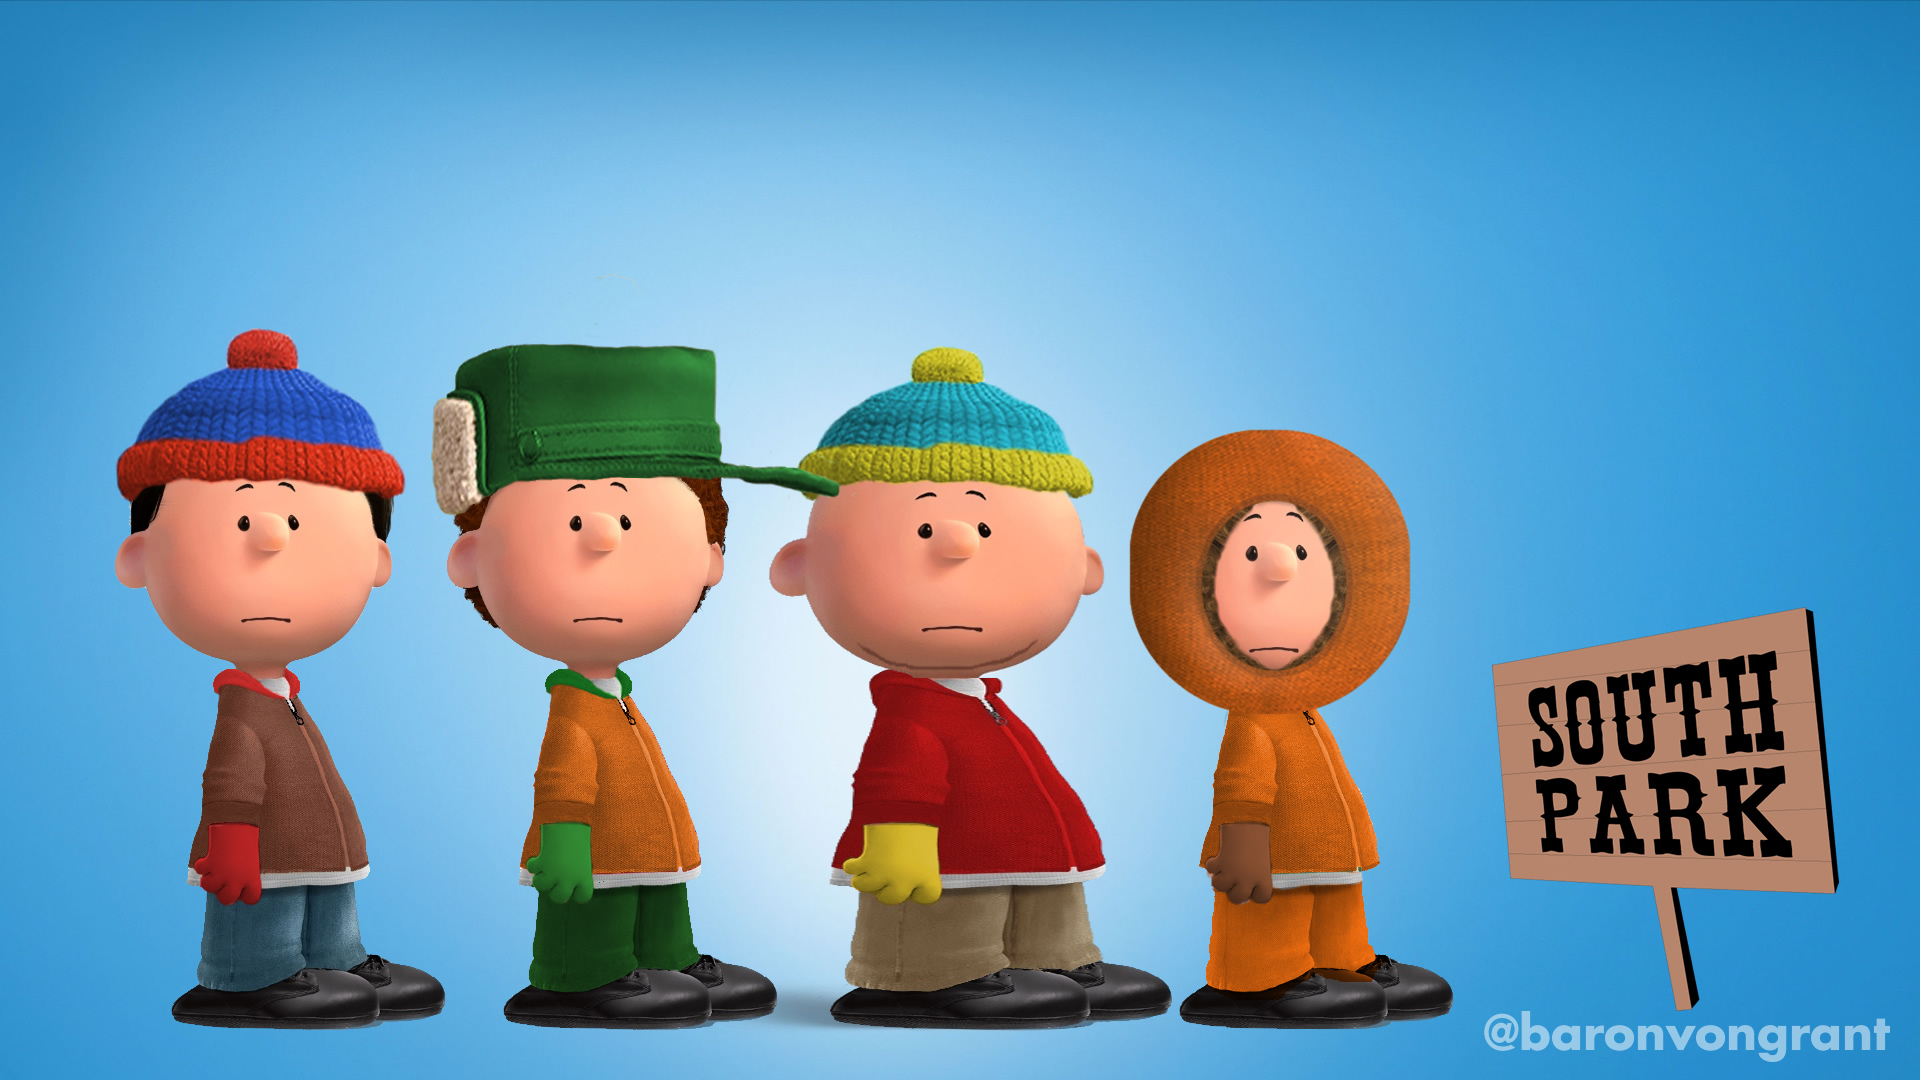 35 Pictures Of Famous And Loved Shows In "Peanuts" Style